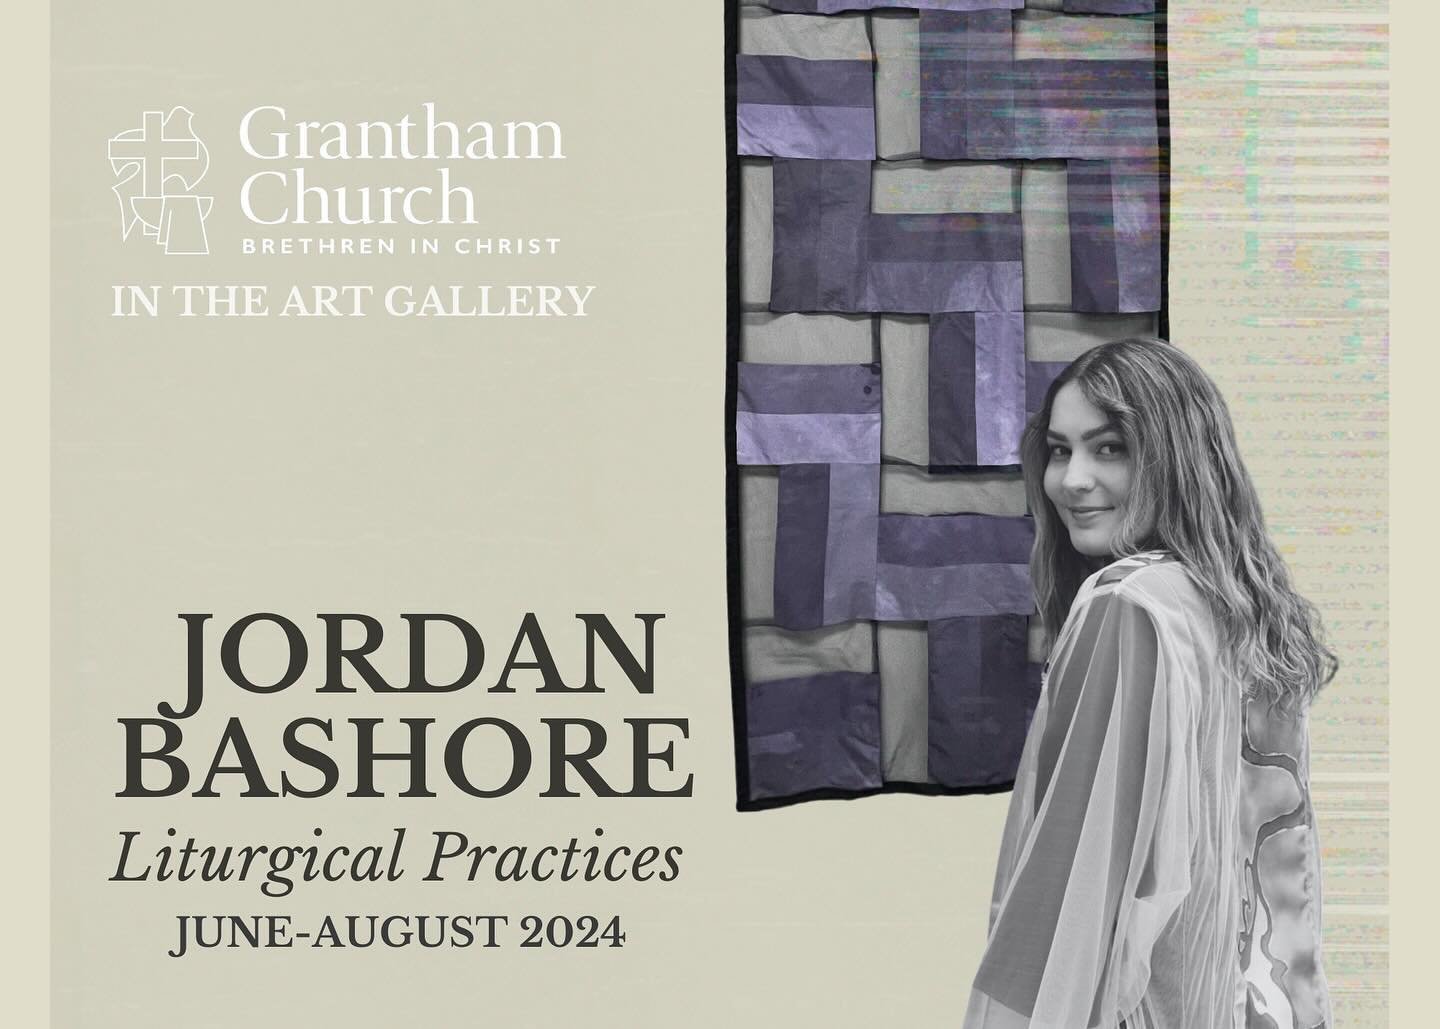 Humbled and excited to share my first solo art exhibition for this summer! My work will be on display at Grantham BIC from June-August, with an opening reception on June 9th at noon. I would love to see you there! #visualartist #textiles #chritianart